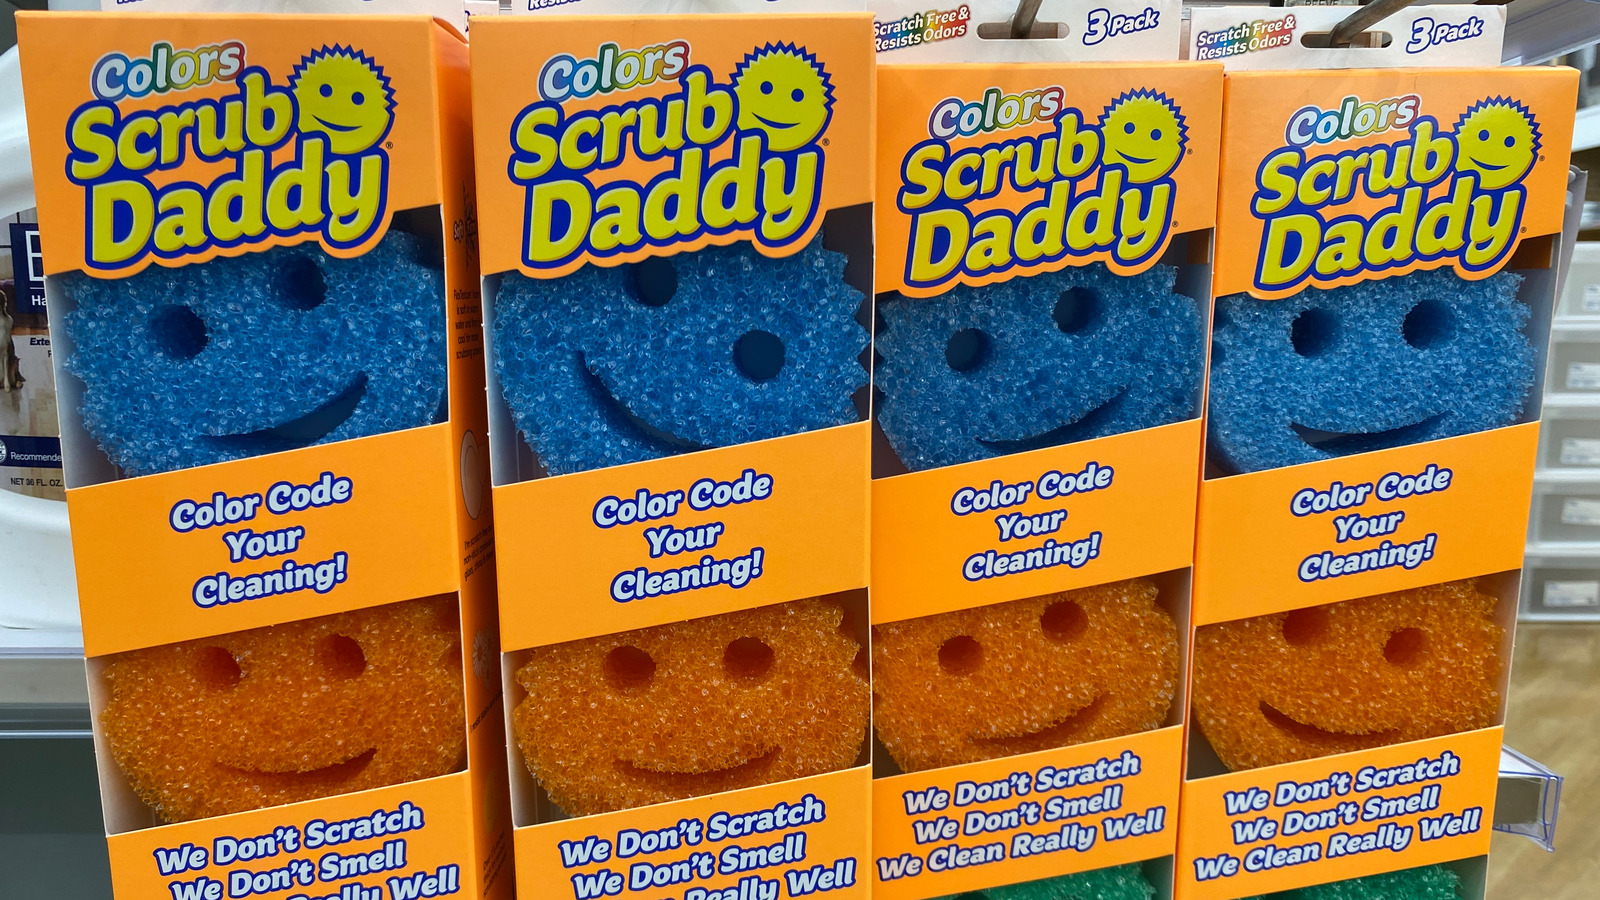 https://www.housedigest.com/img/gallery/the-most-important-place-to-use-a-scrub-daddy-that-youre-probably-missing/l-intro-1658146495.jpg